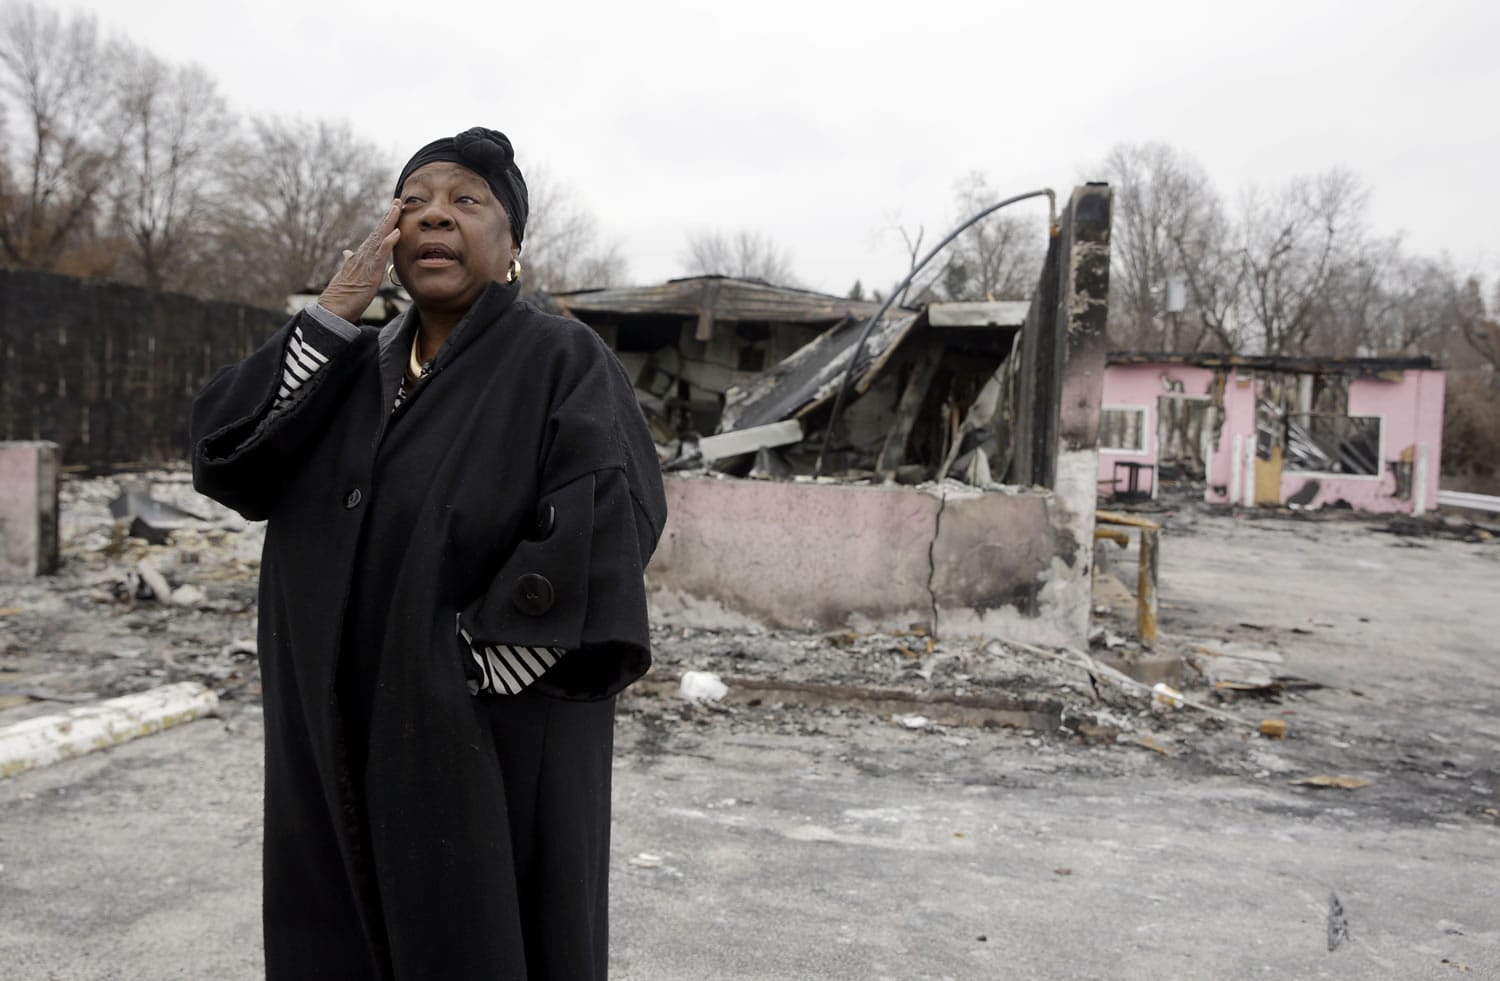 Juanita Morris wipes her eye outside the remains of her burned-out business on Dec. 9 in Dellwood, Mo. On the morning of Nov. 24, Juanita's Fashions R Boutique opened for business as usual.